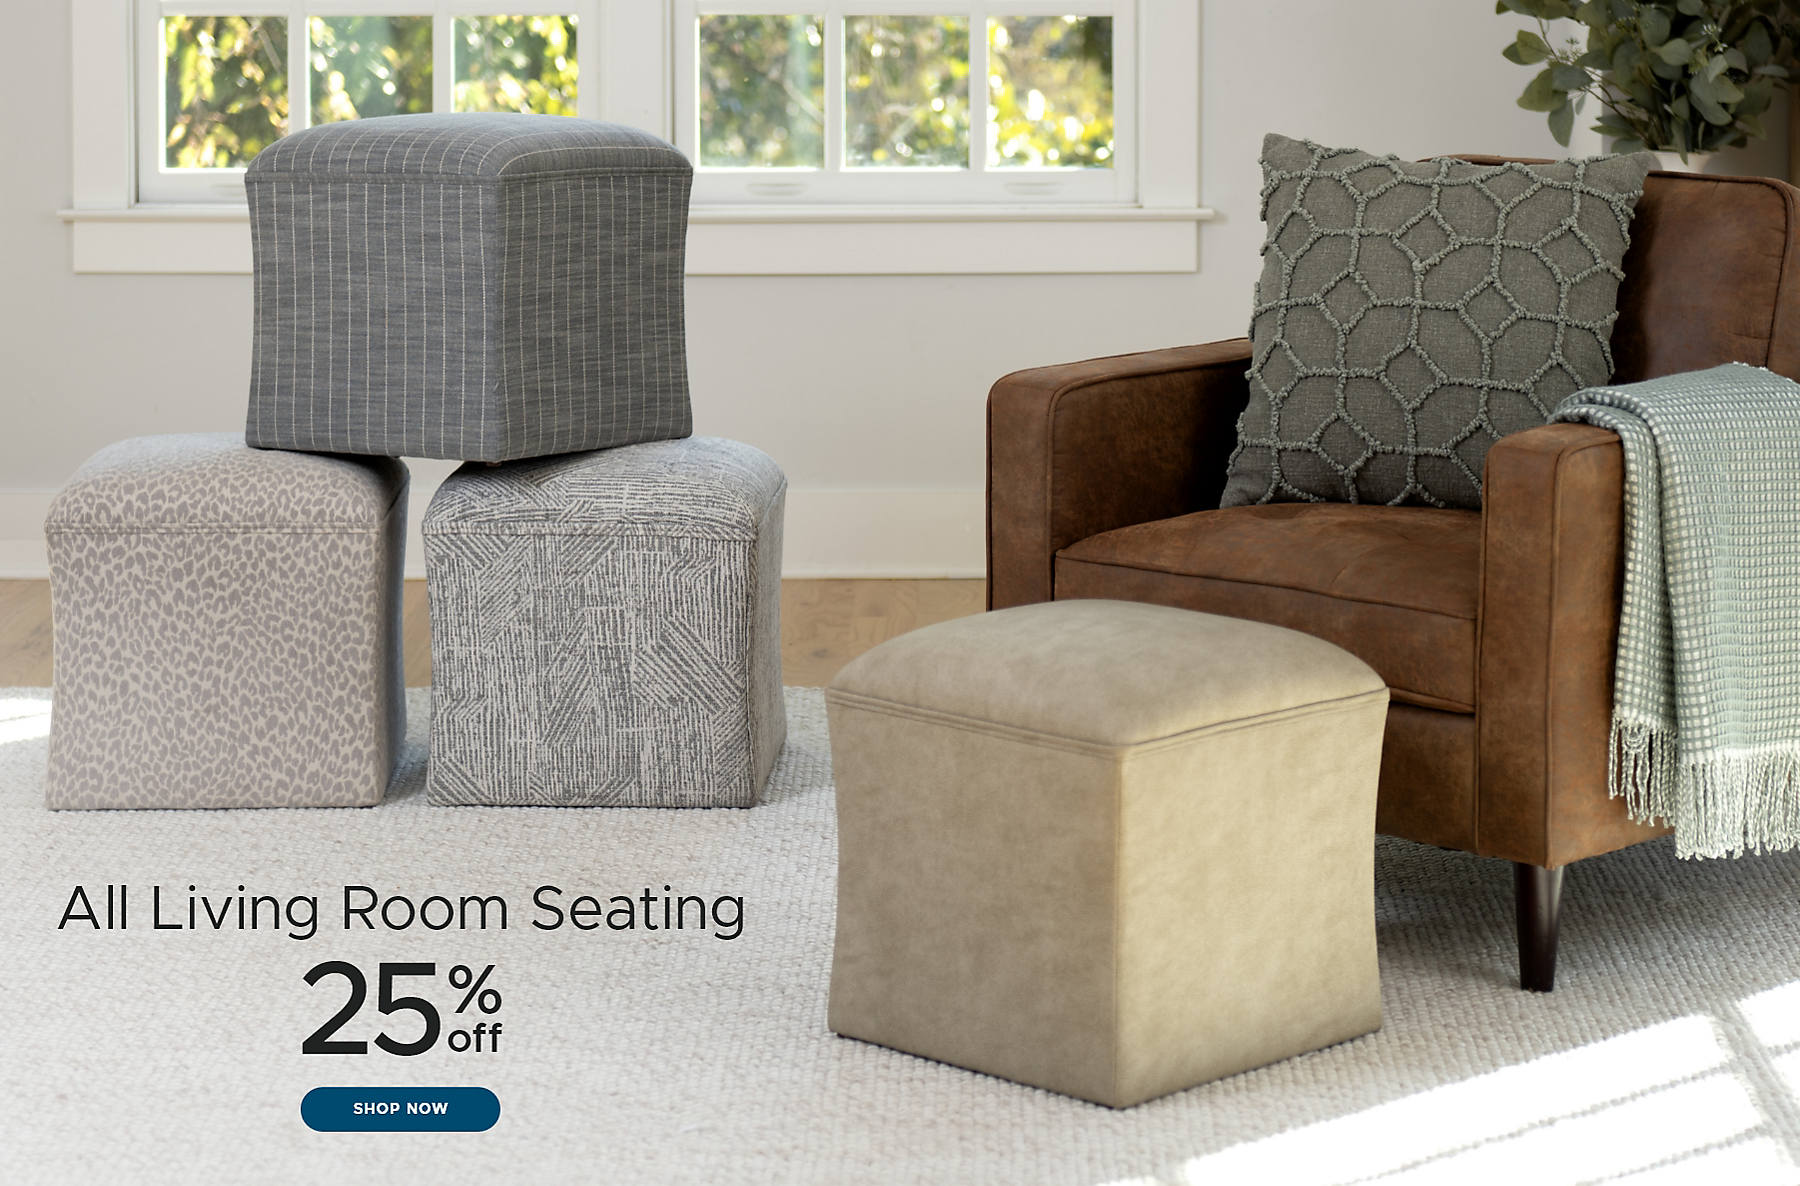 All Living Room Seating 25% off shop now